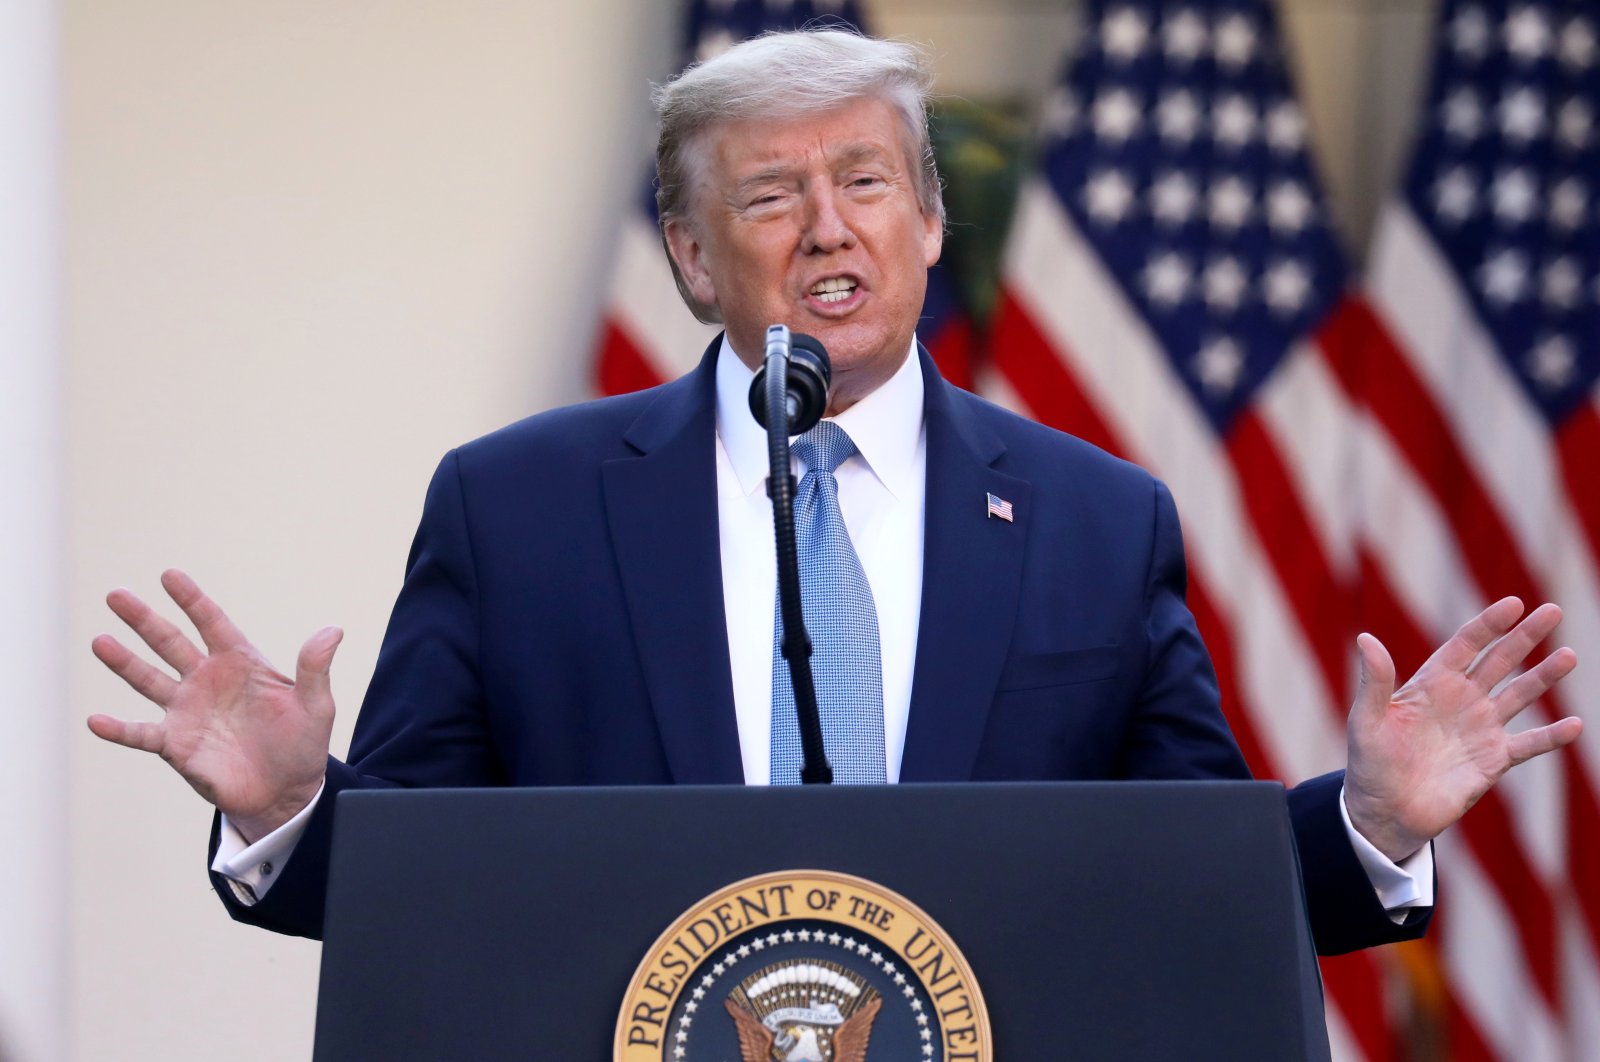 U.S. President Donald Trump addresses the daily coronavirus task force briefing in the Rose Garden at the White House in Washington, U.S. (Reuters Photo)